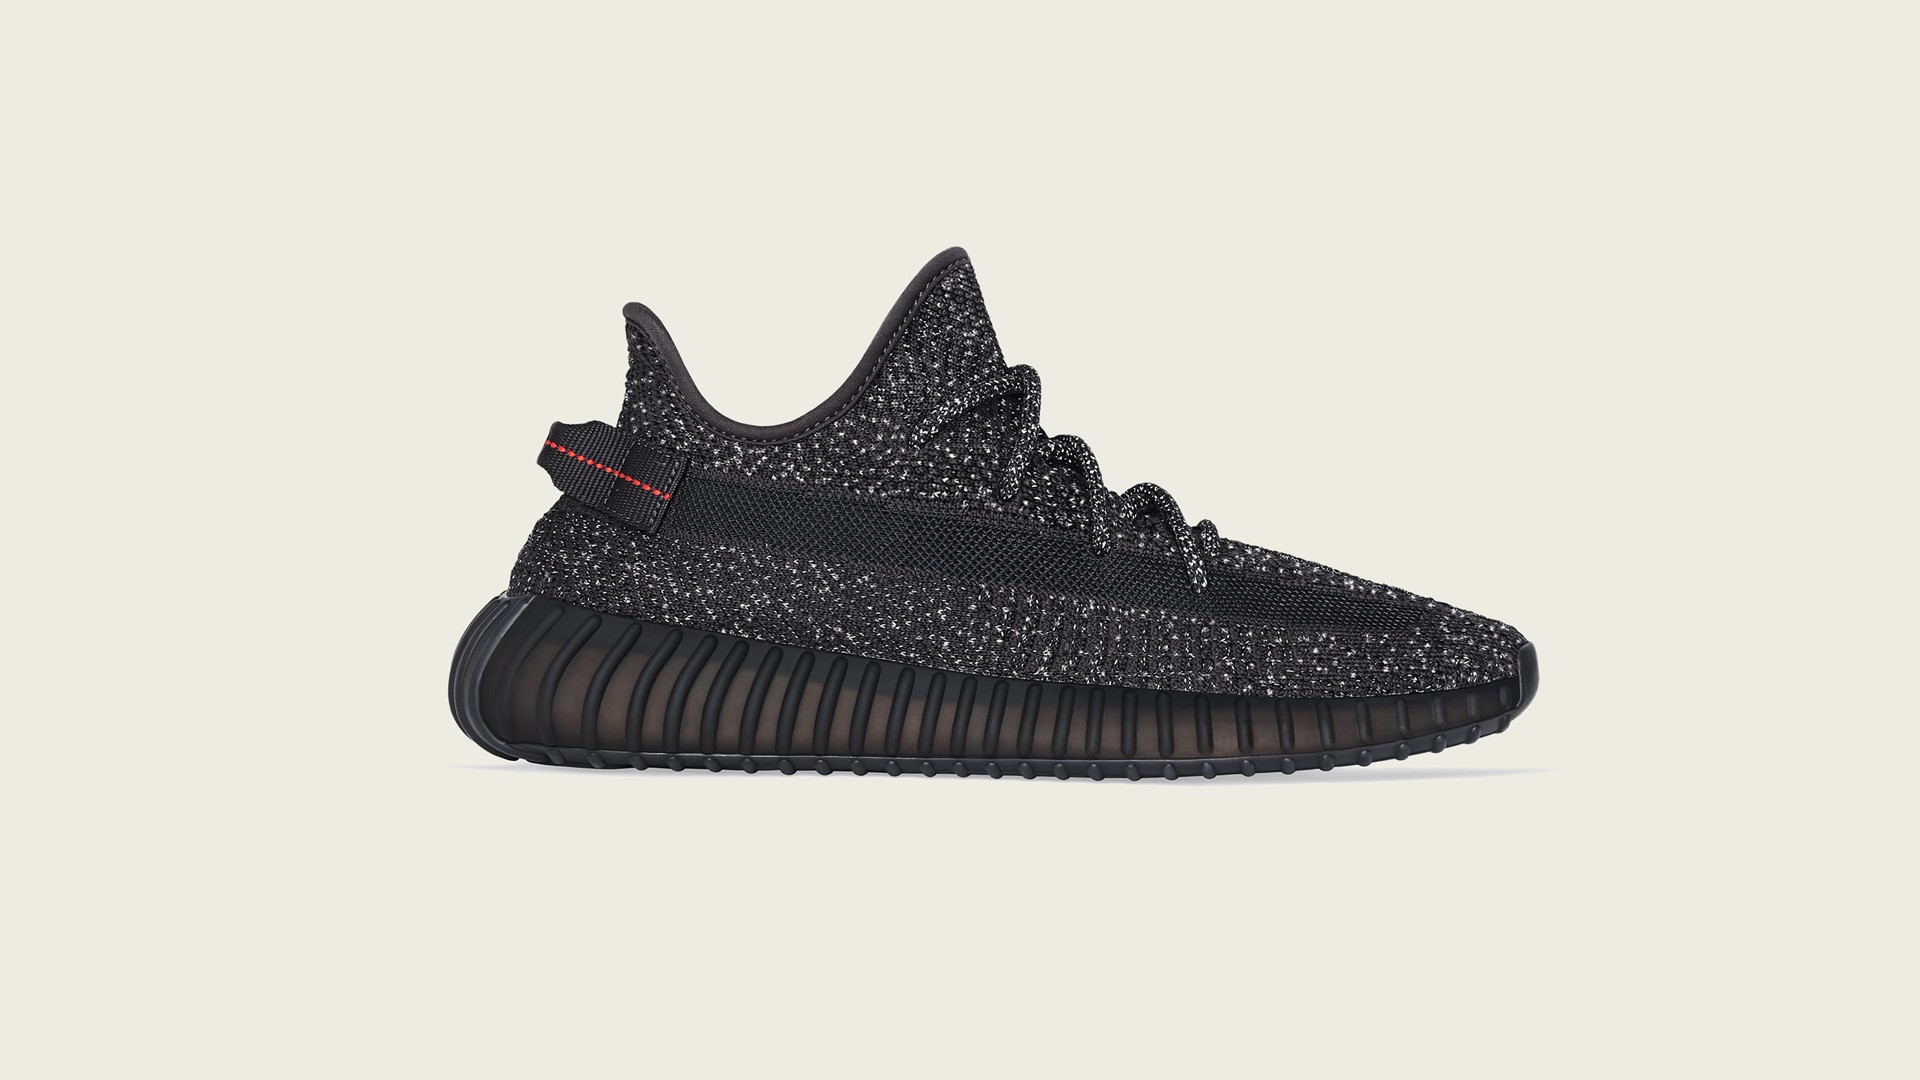 adidas + KANYE WEST announce the YEEZY BOOST 350 V2 Black RF